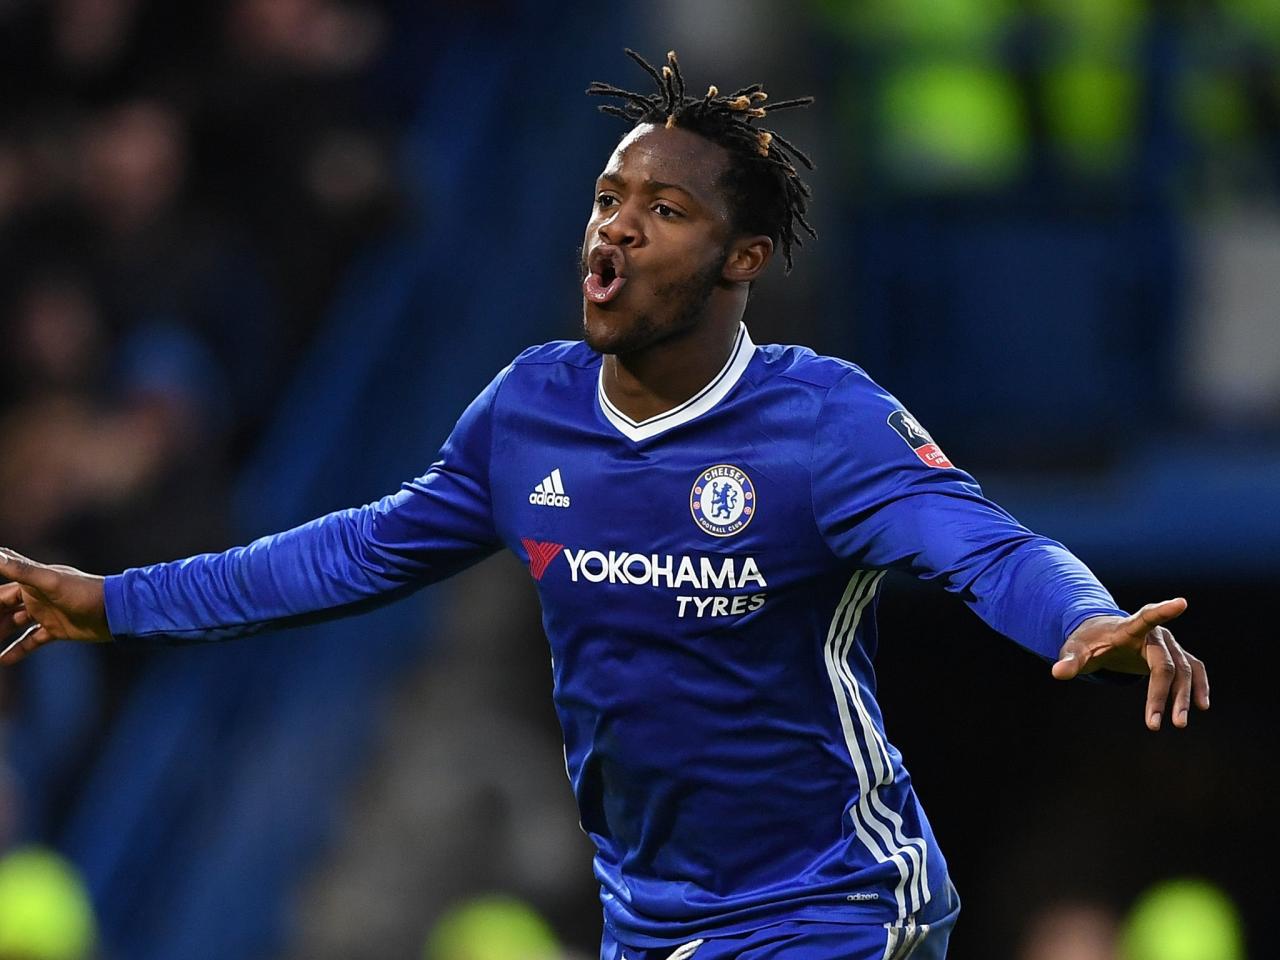 Michy Batshuayi likely to leave Chelsea after just one season at Stamford Bridge | The Independent | The Independent